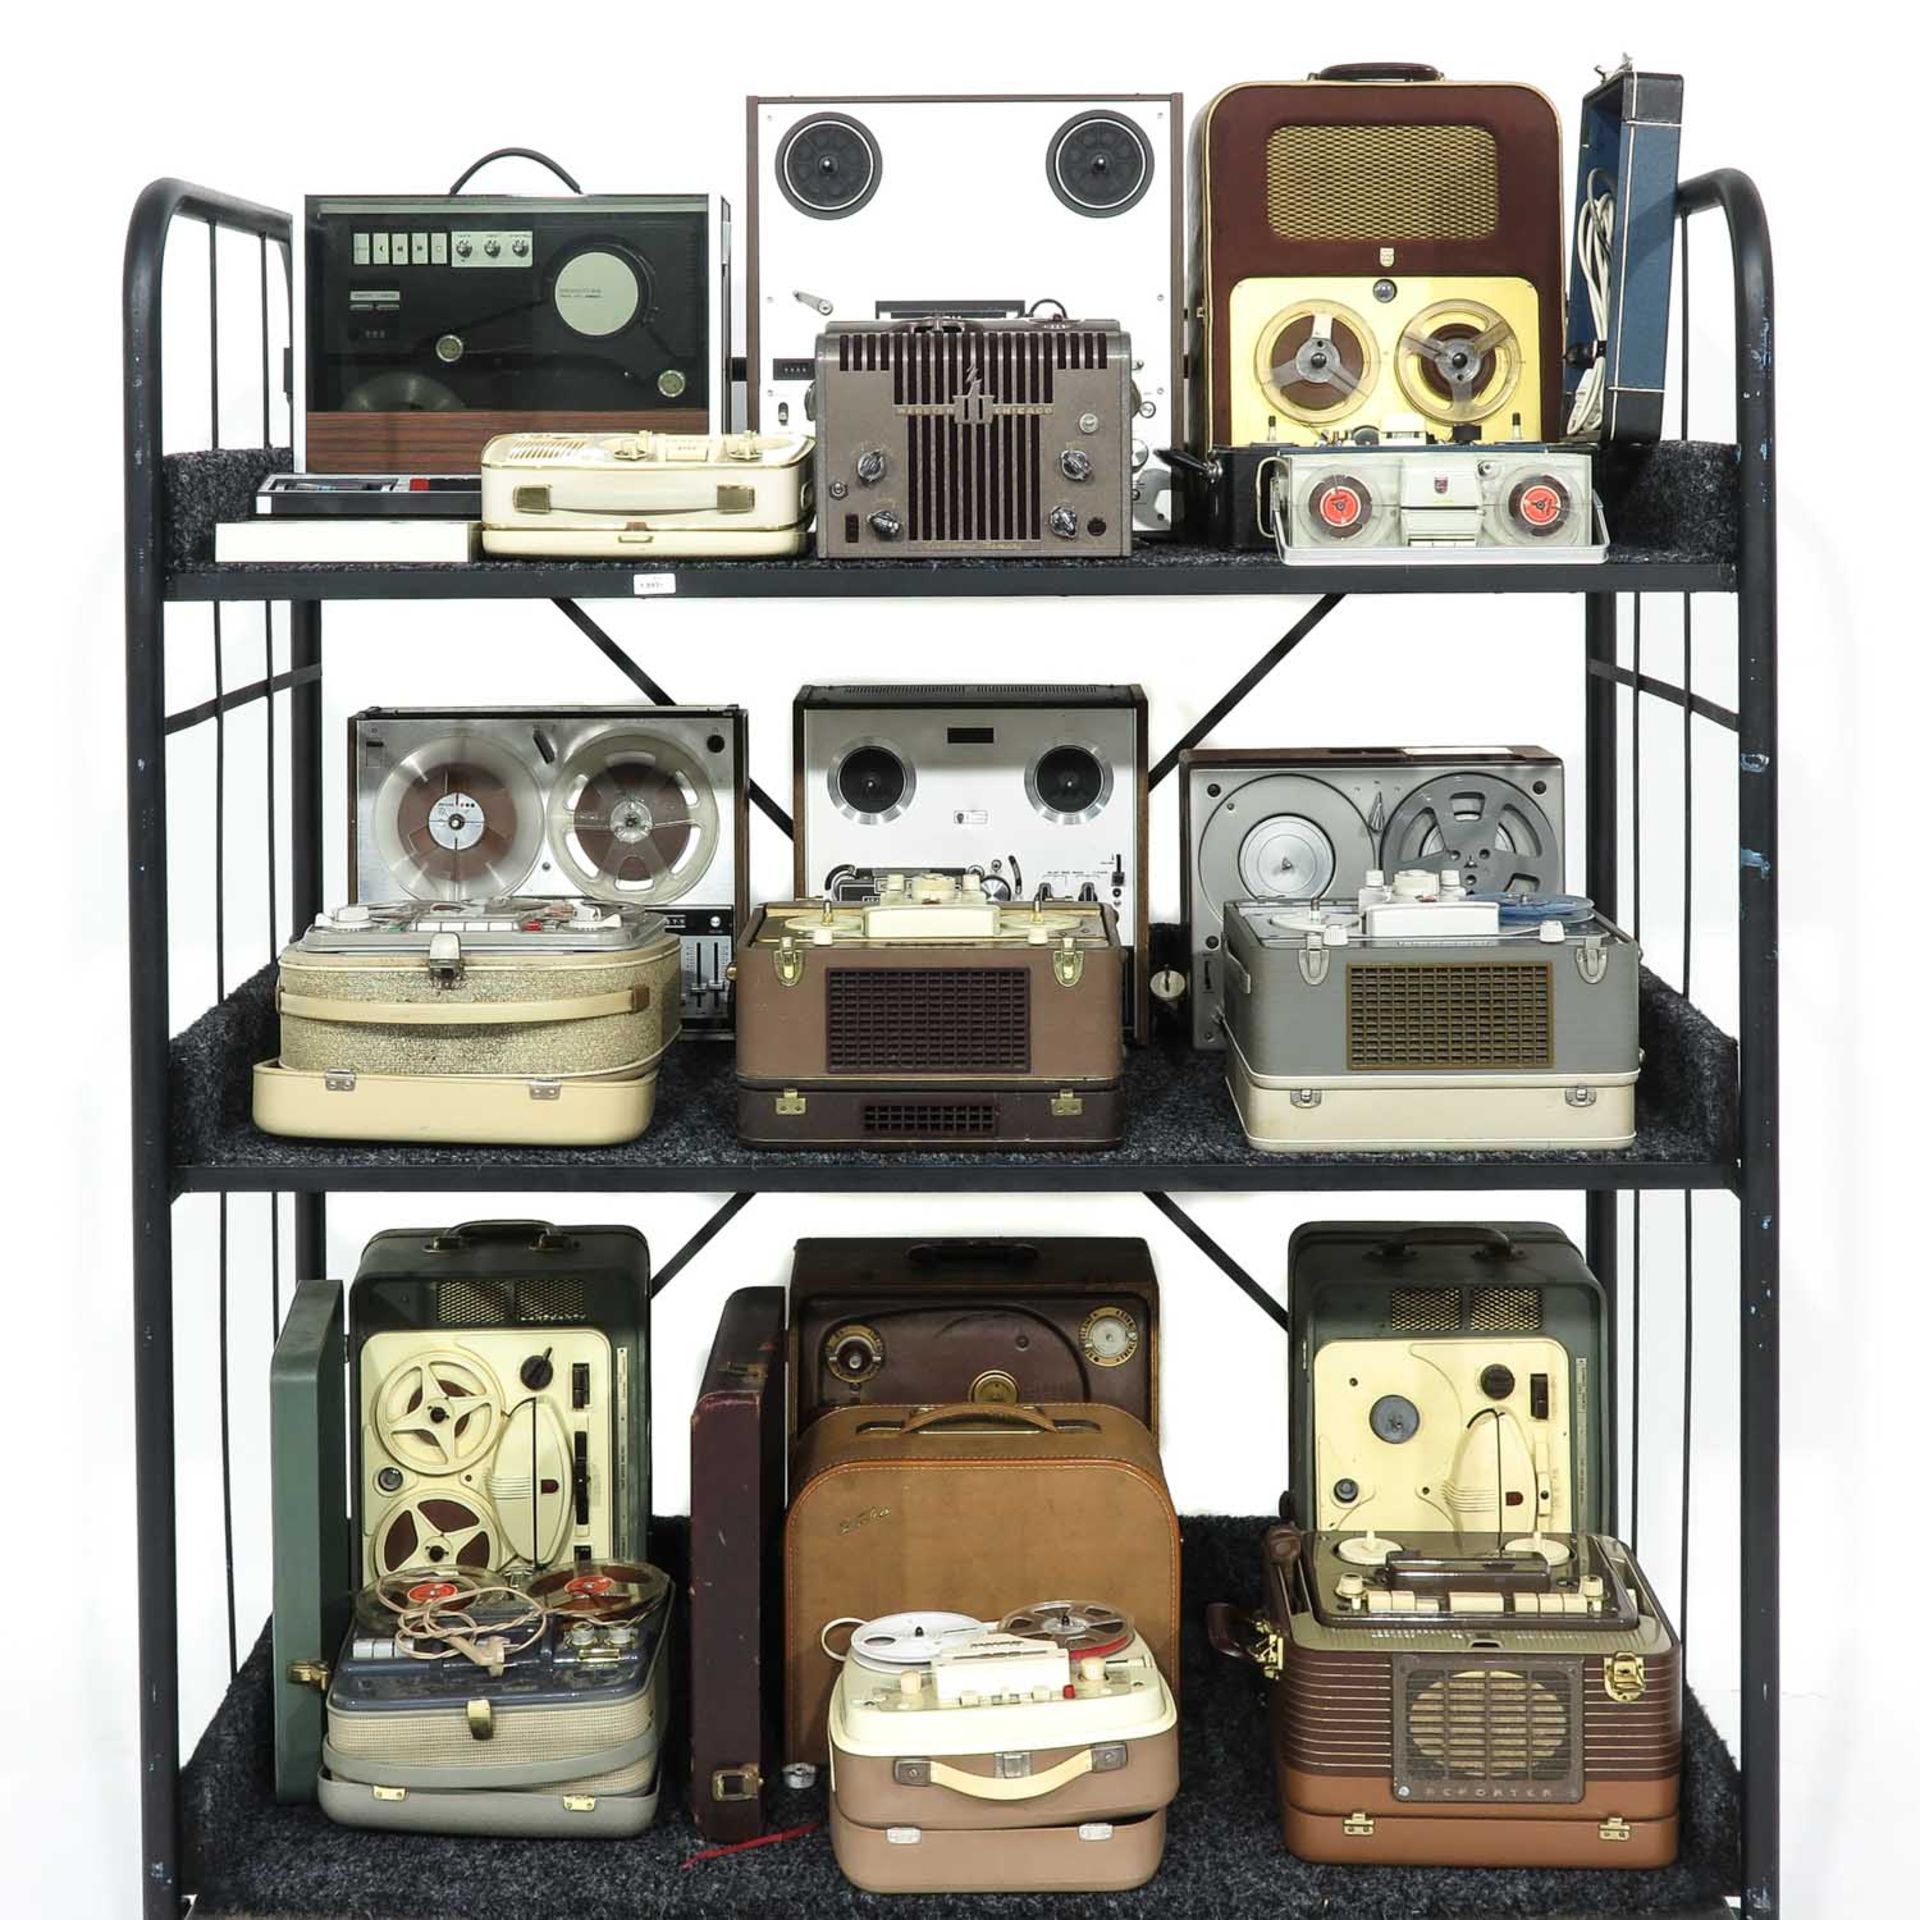 A Collection of 22 Tape Recorders